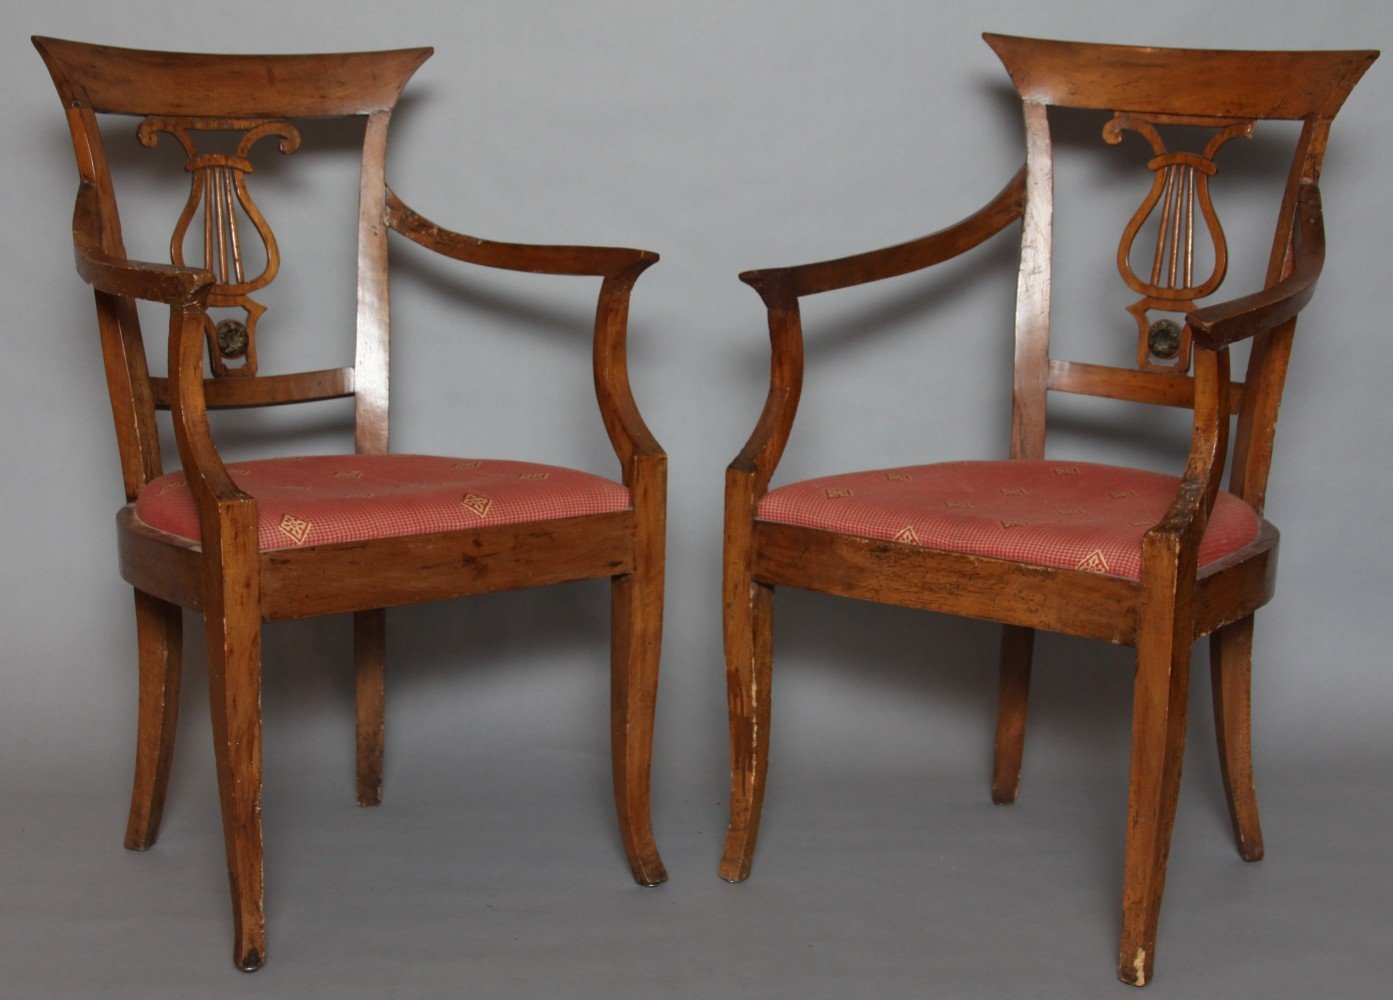 A Pair of Italian Neoclassical Fruitwood Armchairs